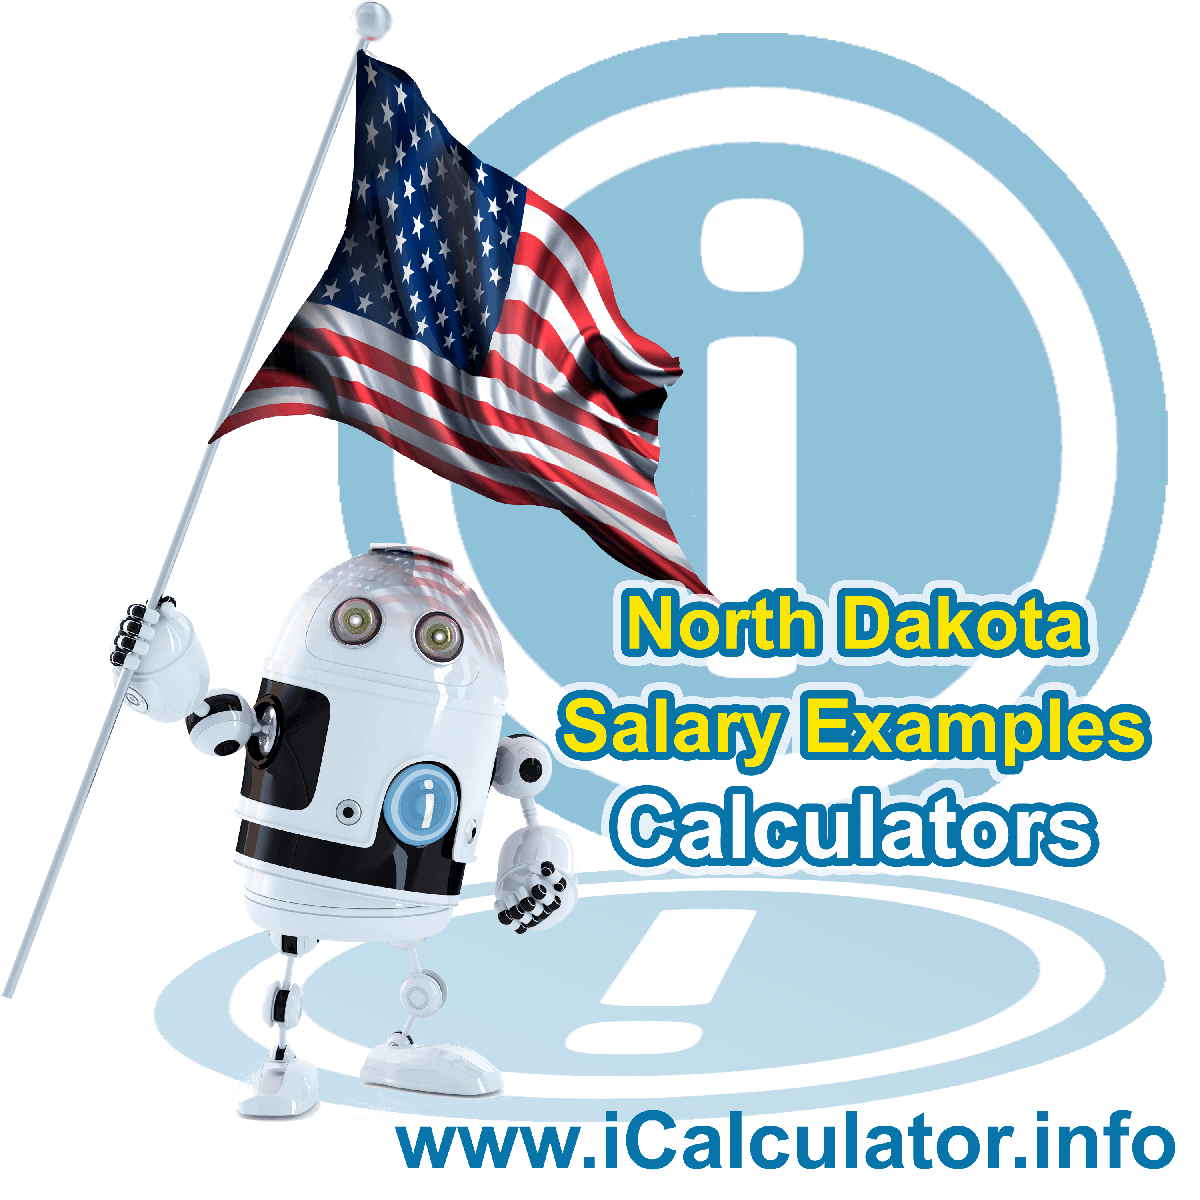 North Dakota Salary Example for $ 210,000.00 in 2023 | iCalculator™ | $ 210,000.00 salary example for employee and employer paying North Dakota State tincome taxes. Detailed salary after tax calculation including North Dakota State Tax, Federal State Tax, Medicare Deductions, Social Security, Capital Gains and other income tax and salary deductions complete with supporting North Dakota state tax tables 